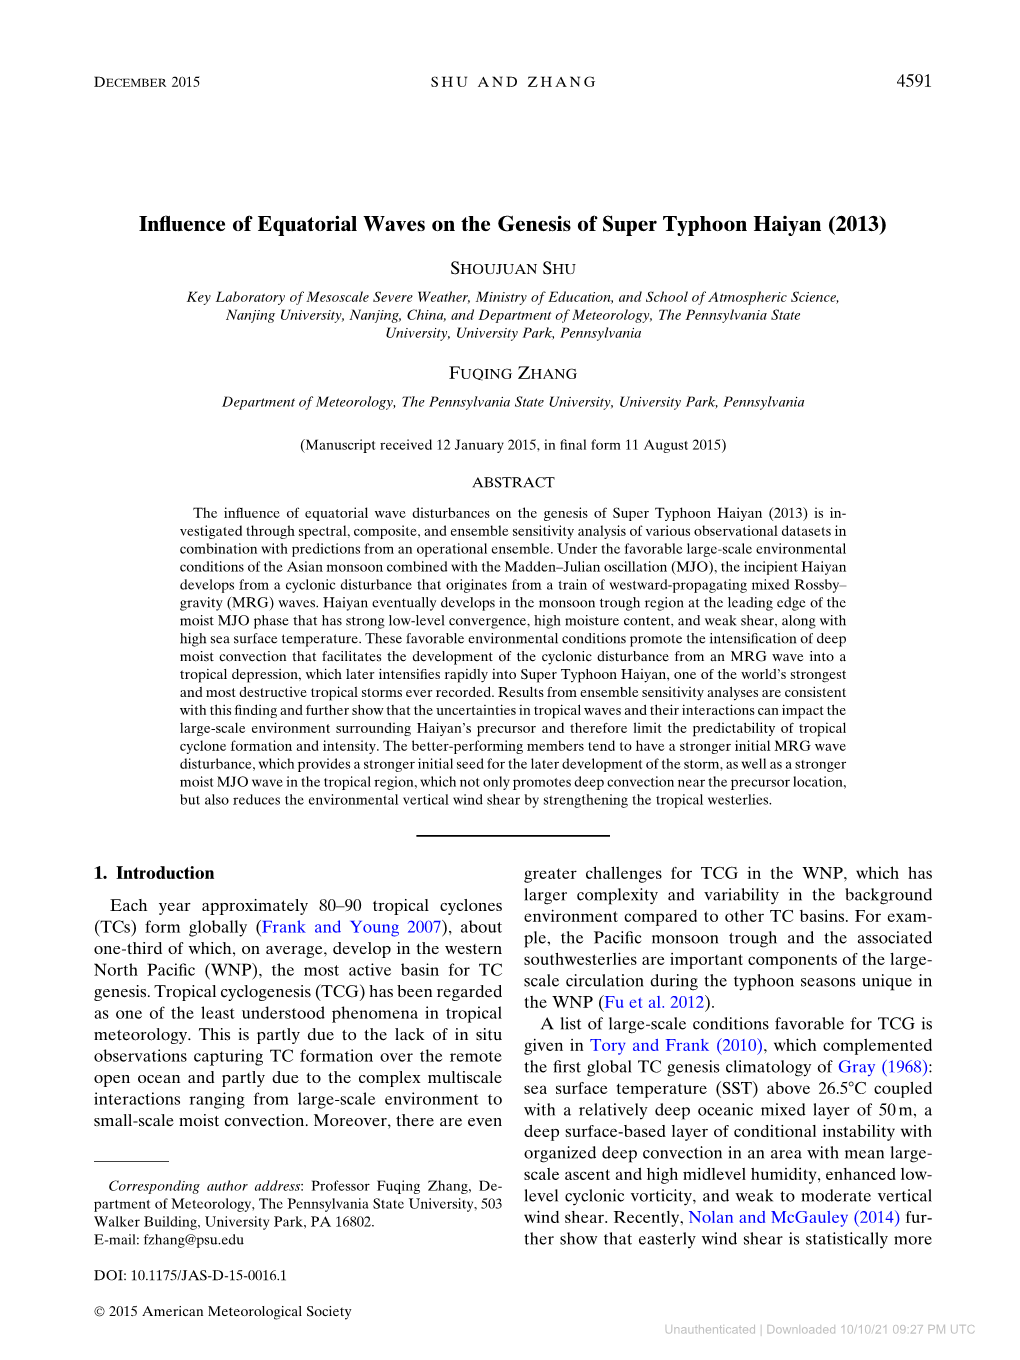 Influence of Equatorial Waves on the Genesis of Super Typhoon Haiyan